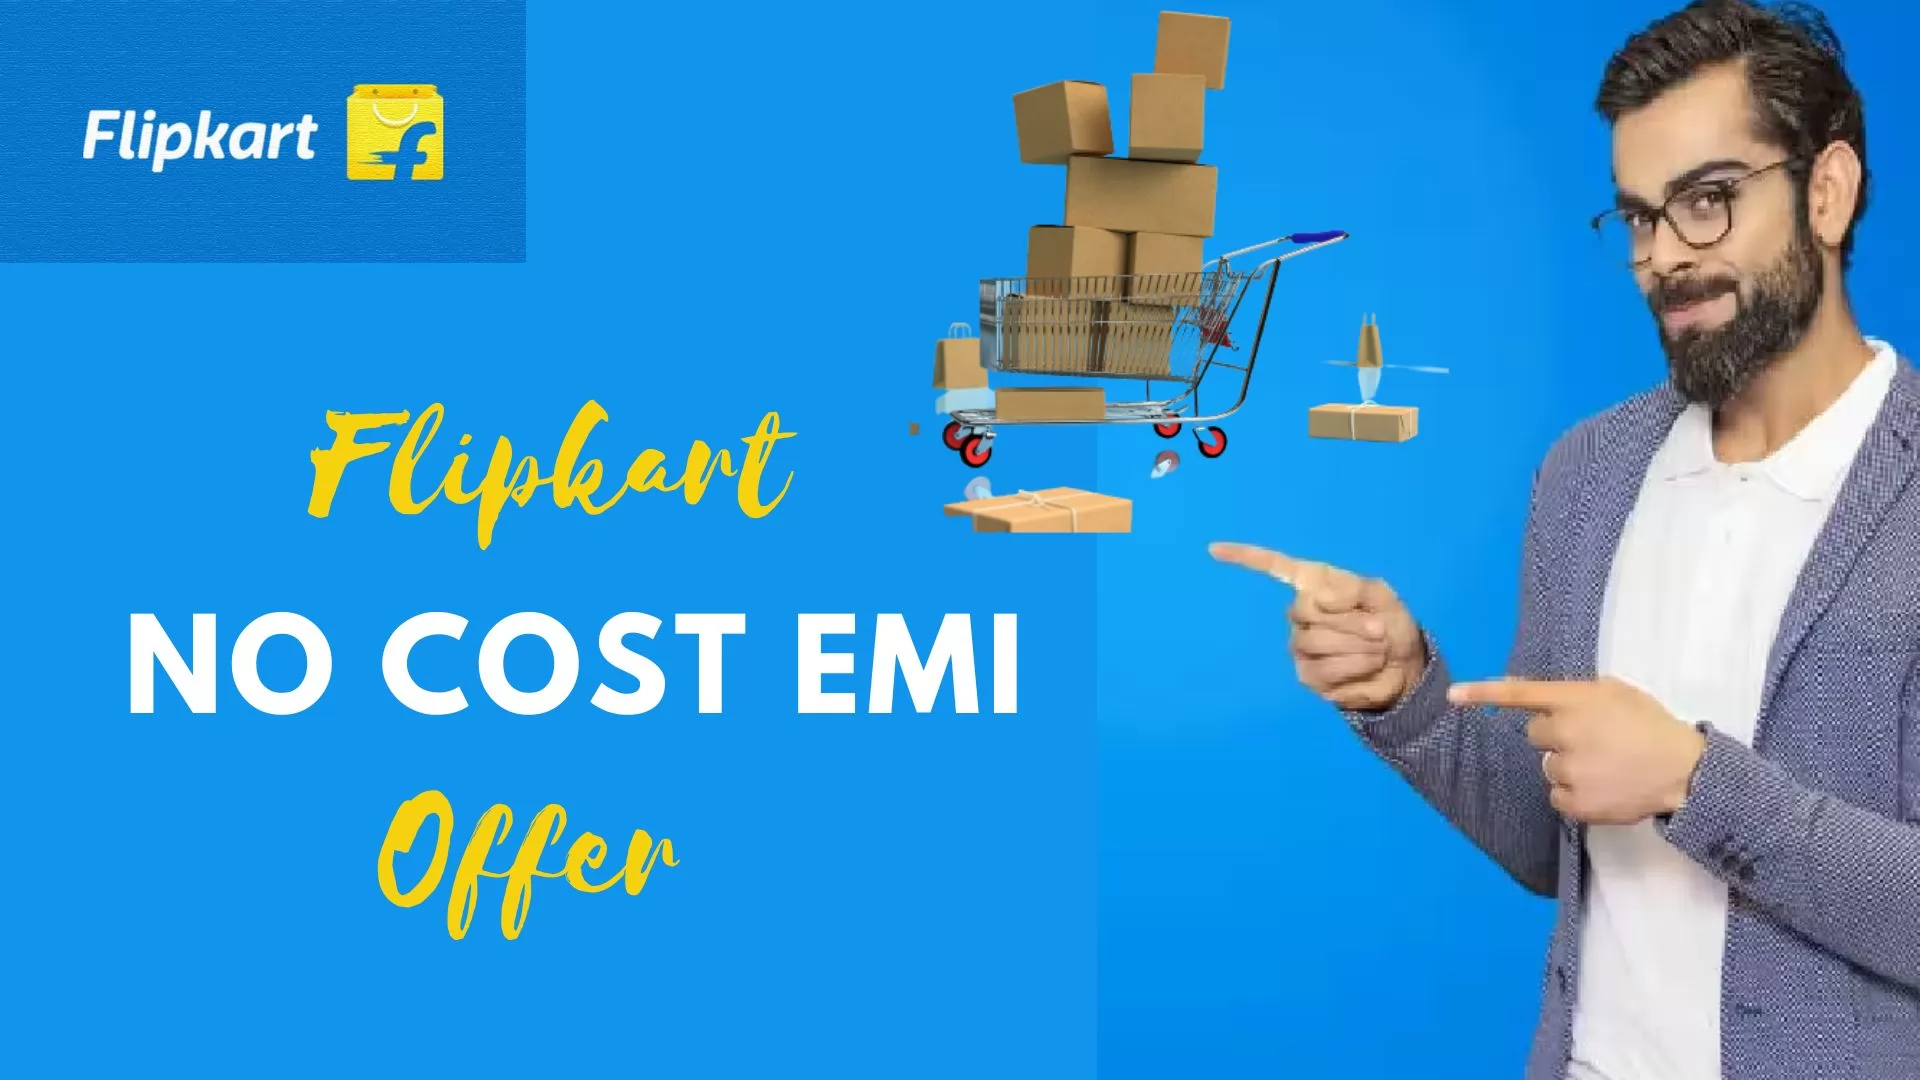 Flipkart No Cost EMI Offer - How To Avail?